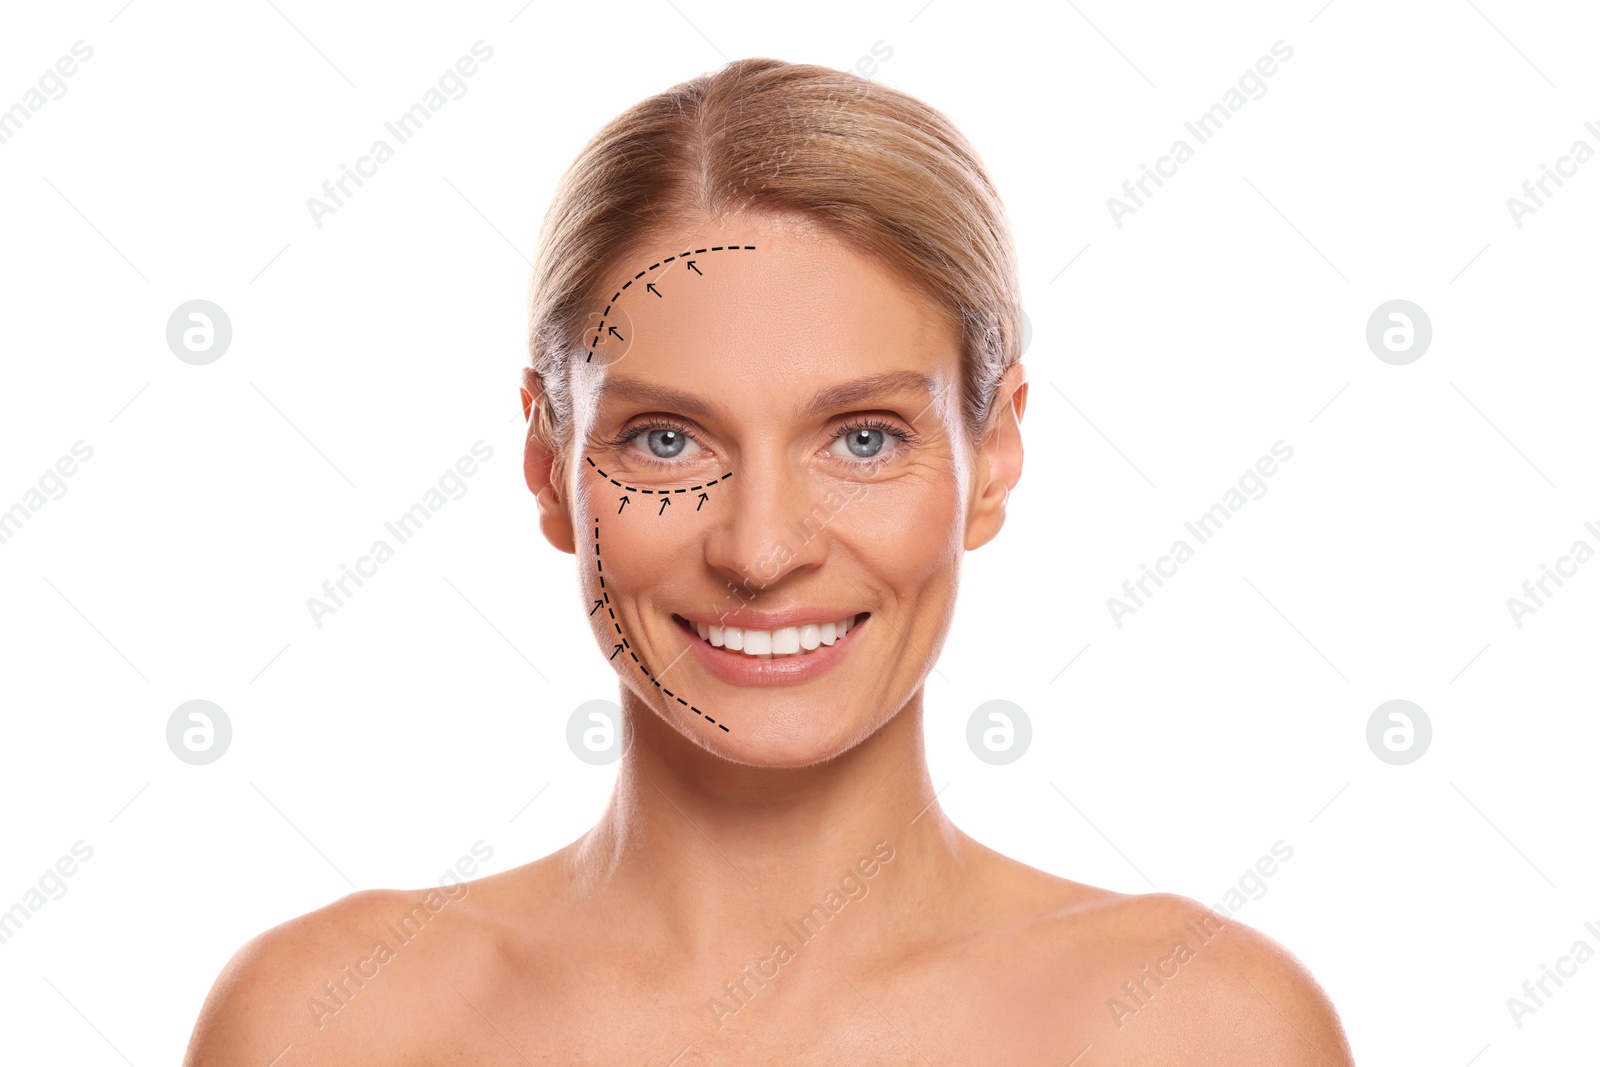 Image of Woman with markings for cosmetic surgery on her face against white background